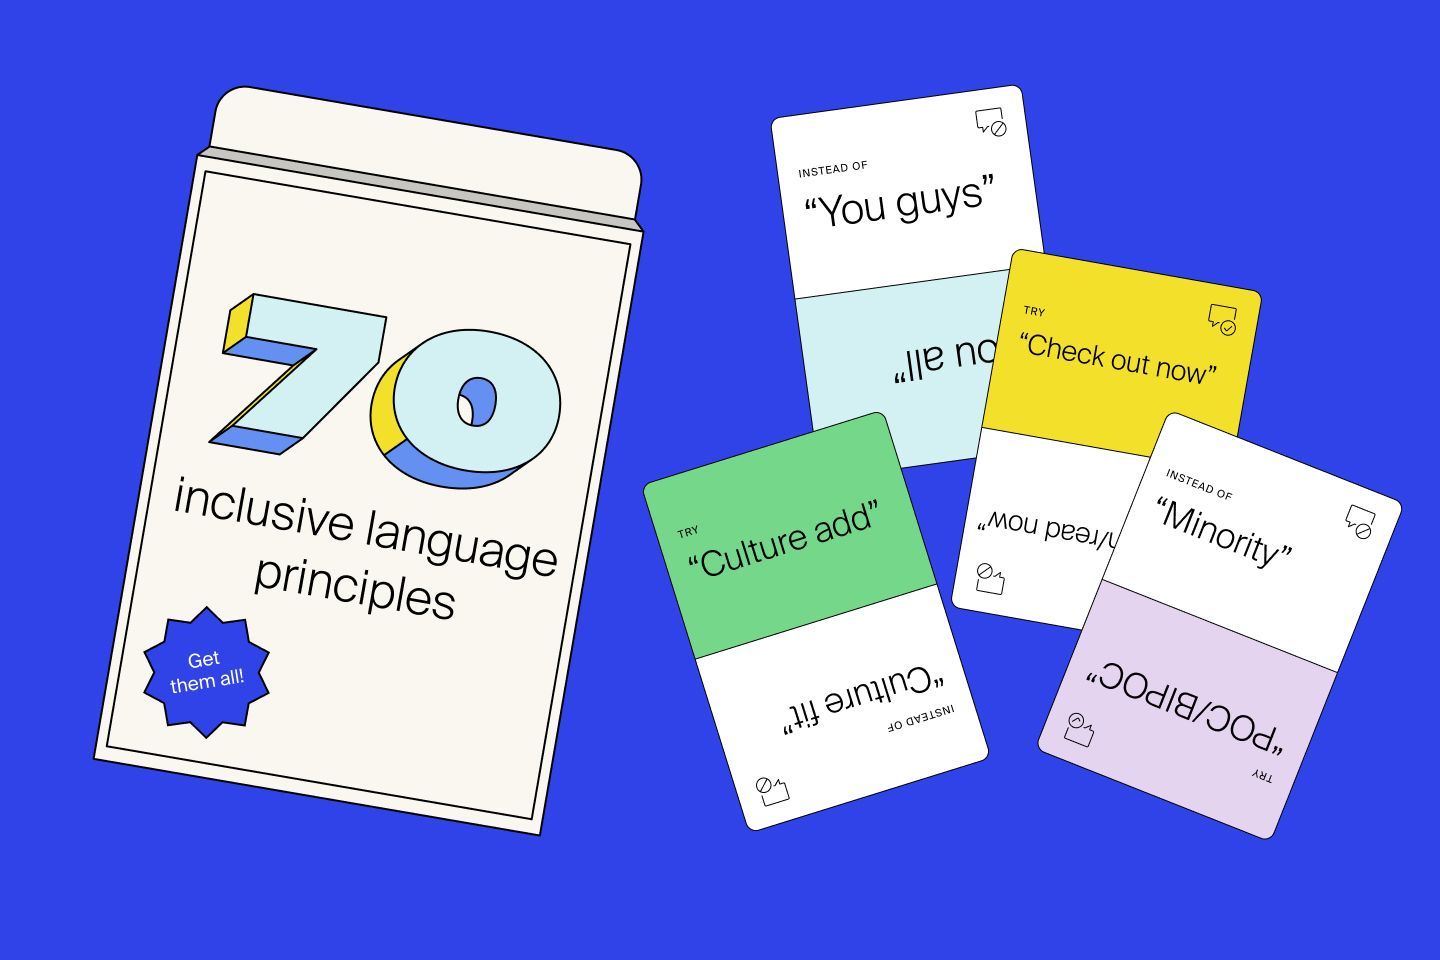 70 Inclusive language principles that will make you a more